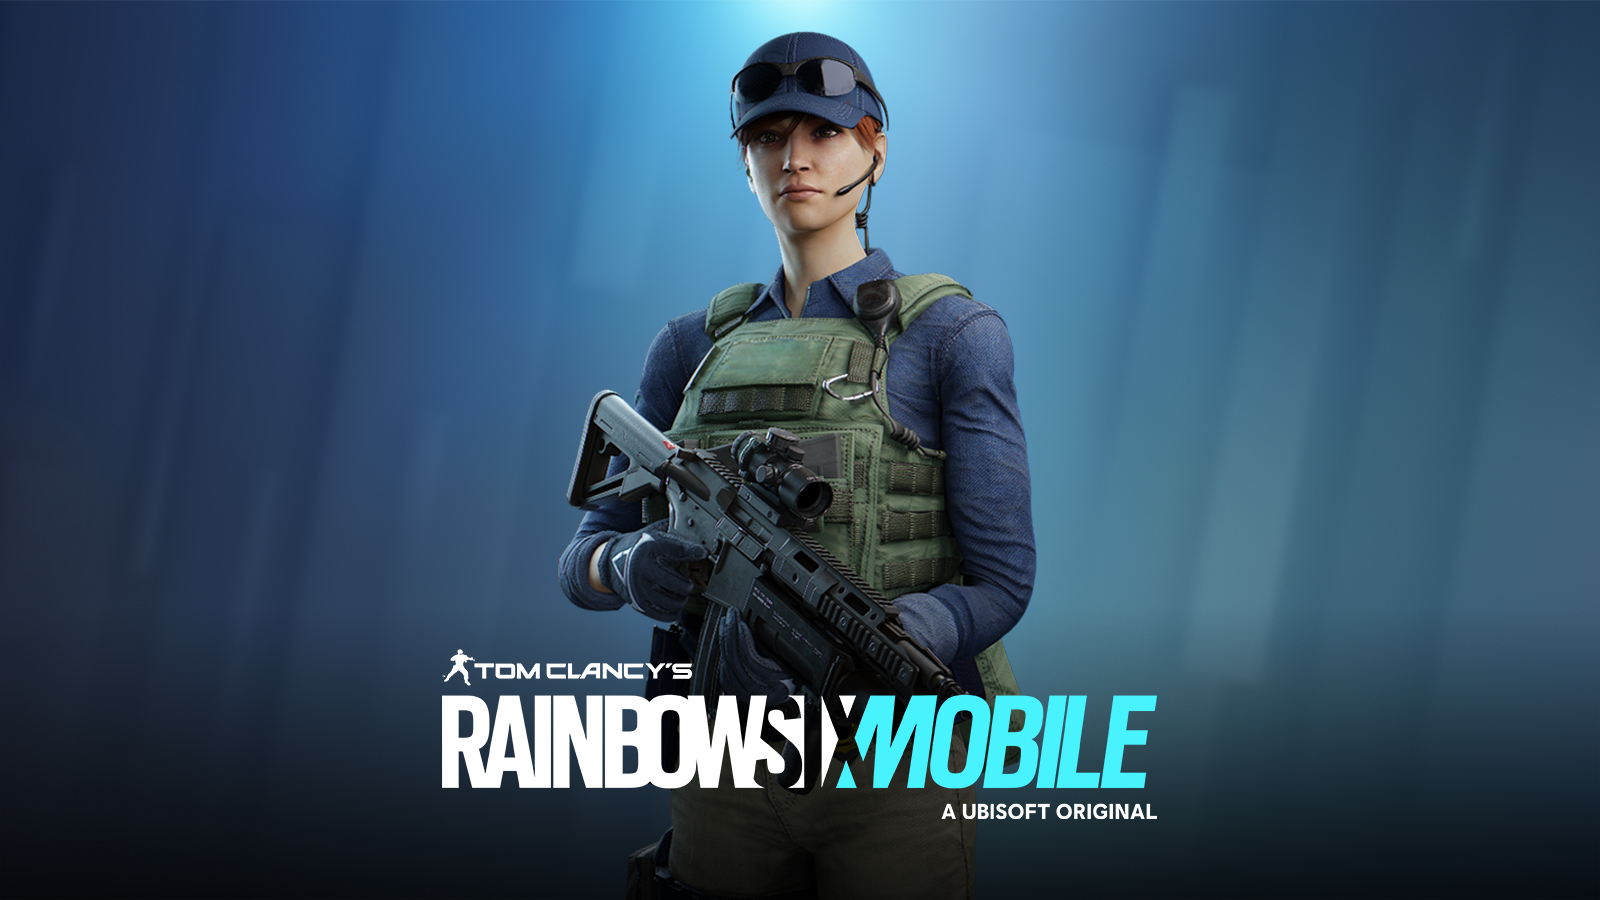 Ubisoft Opens Registration For Rainbow Six Mobile On Android And